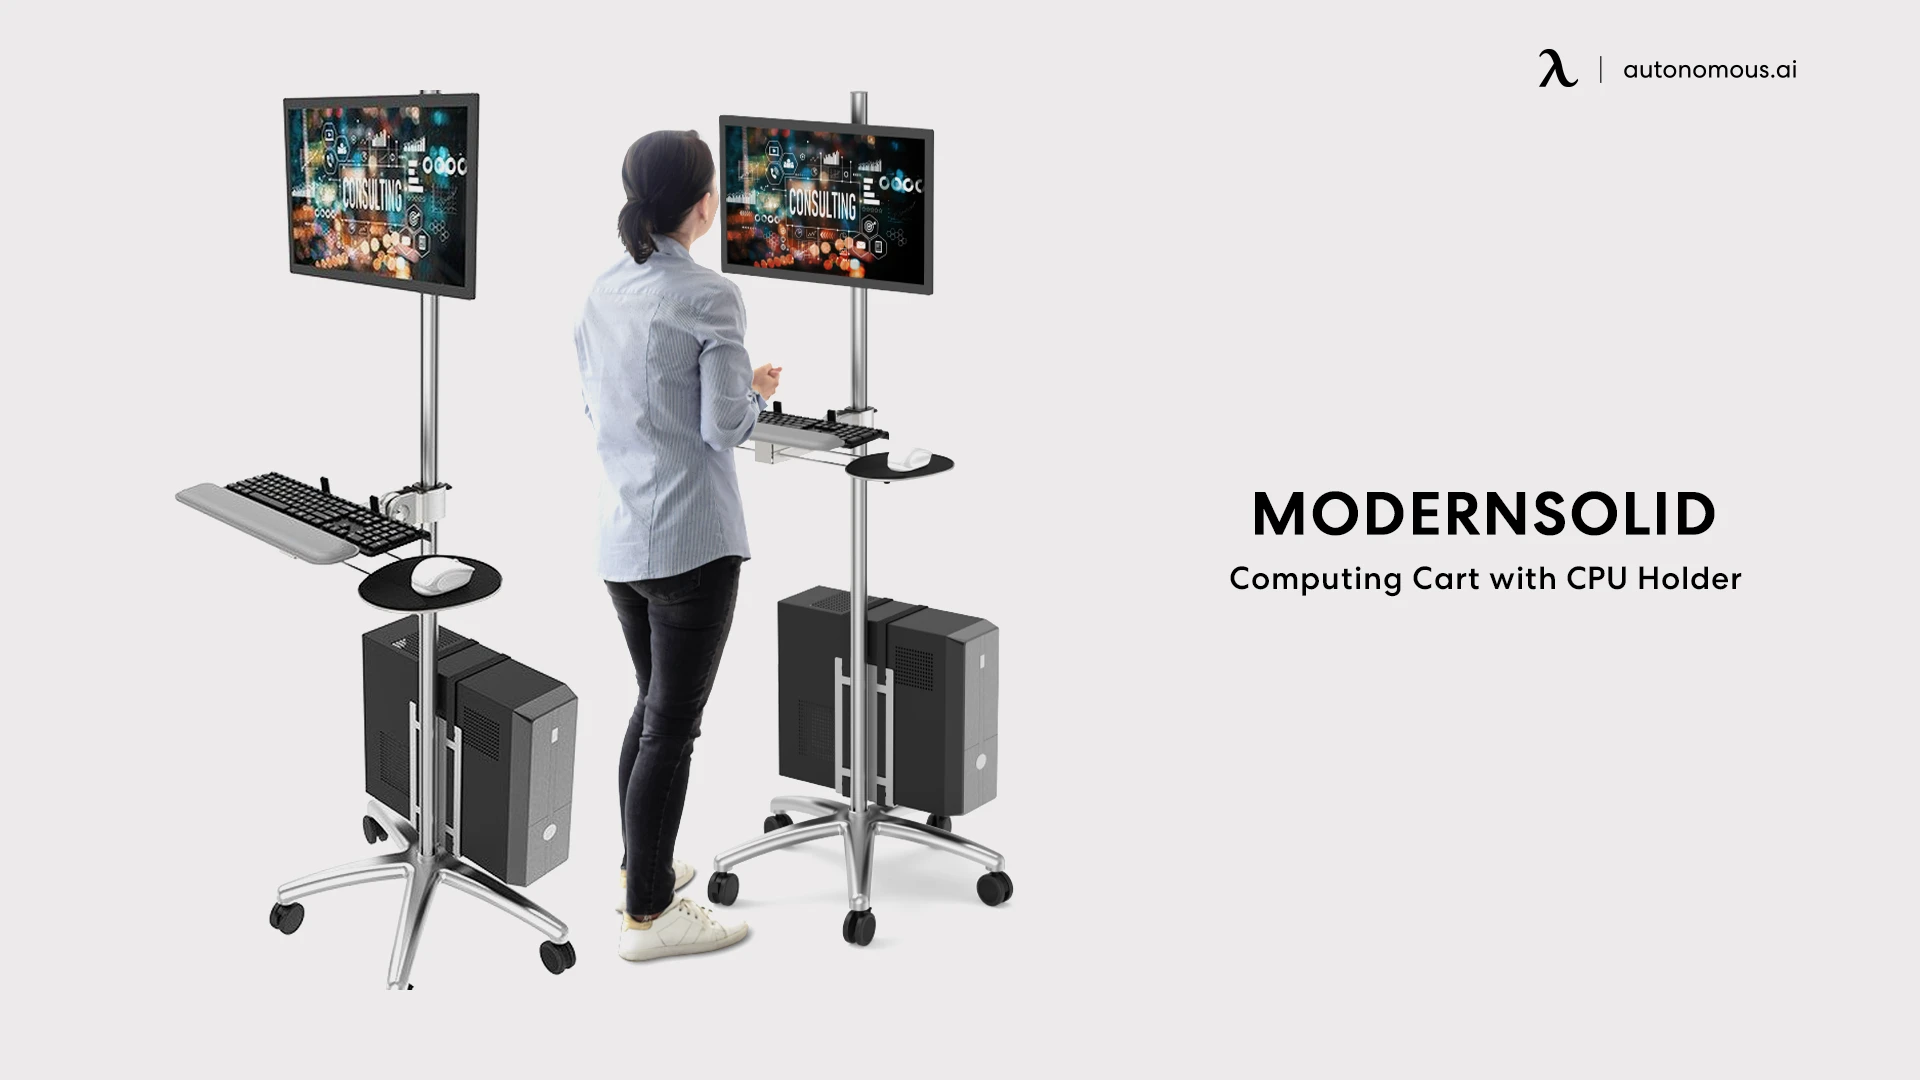 Modernsolid Mobile Computing Cart with CPU Holder